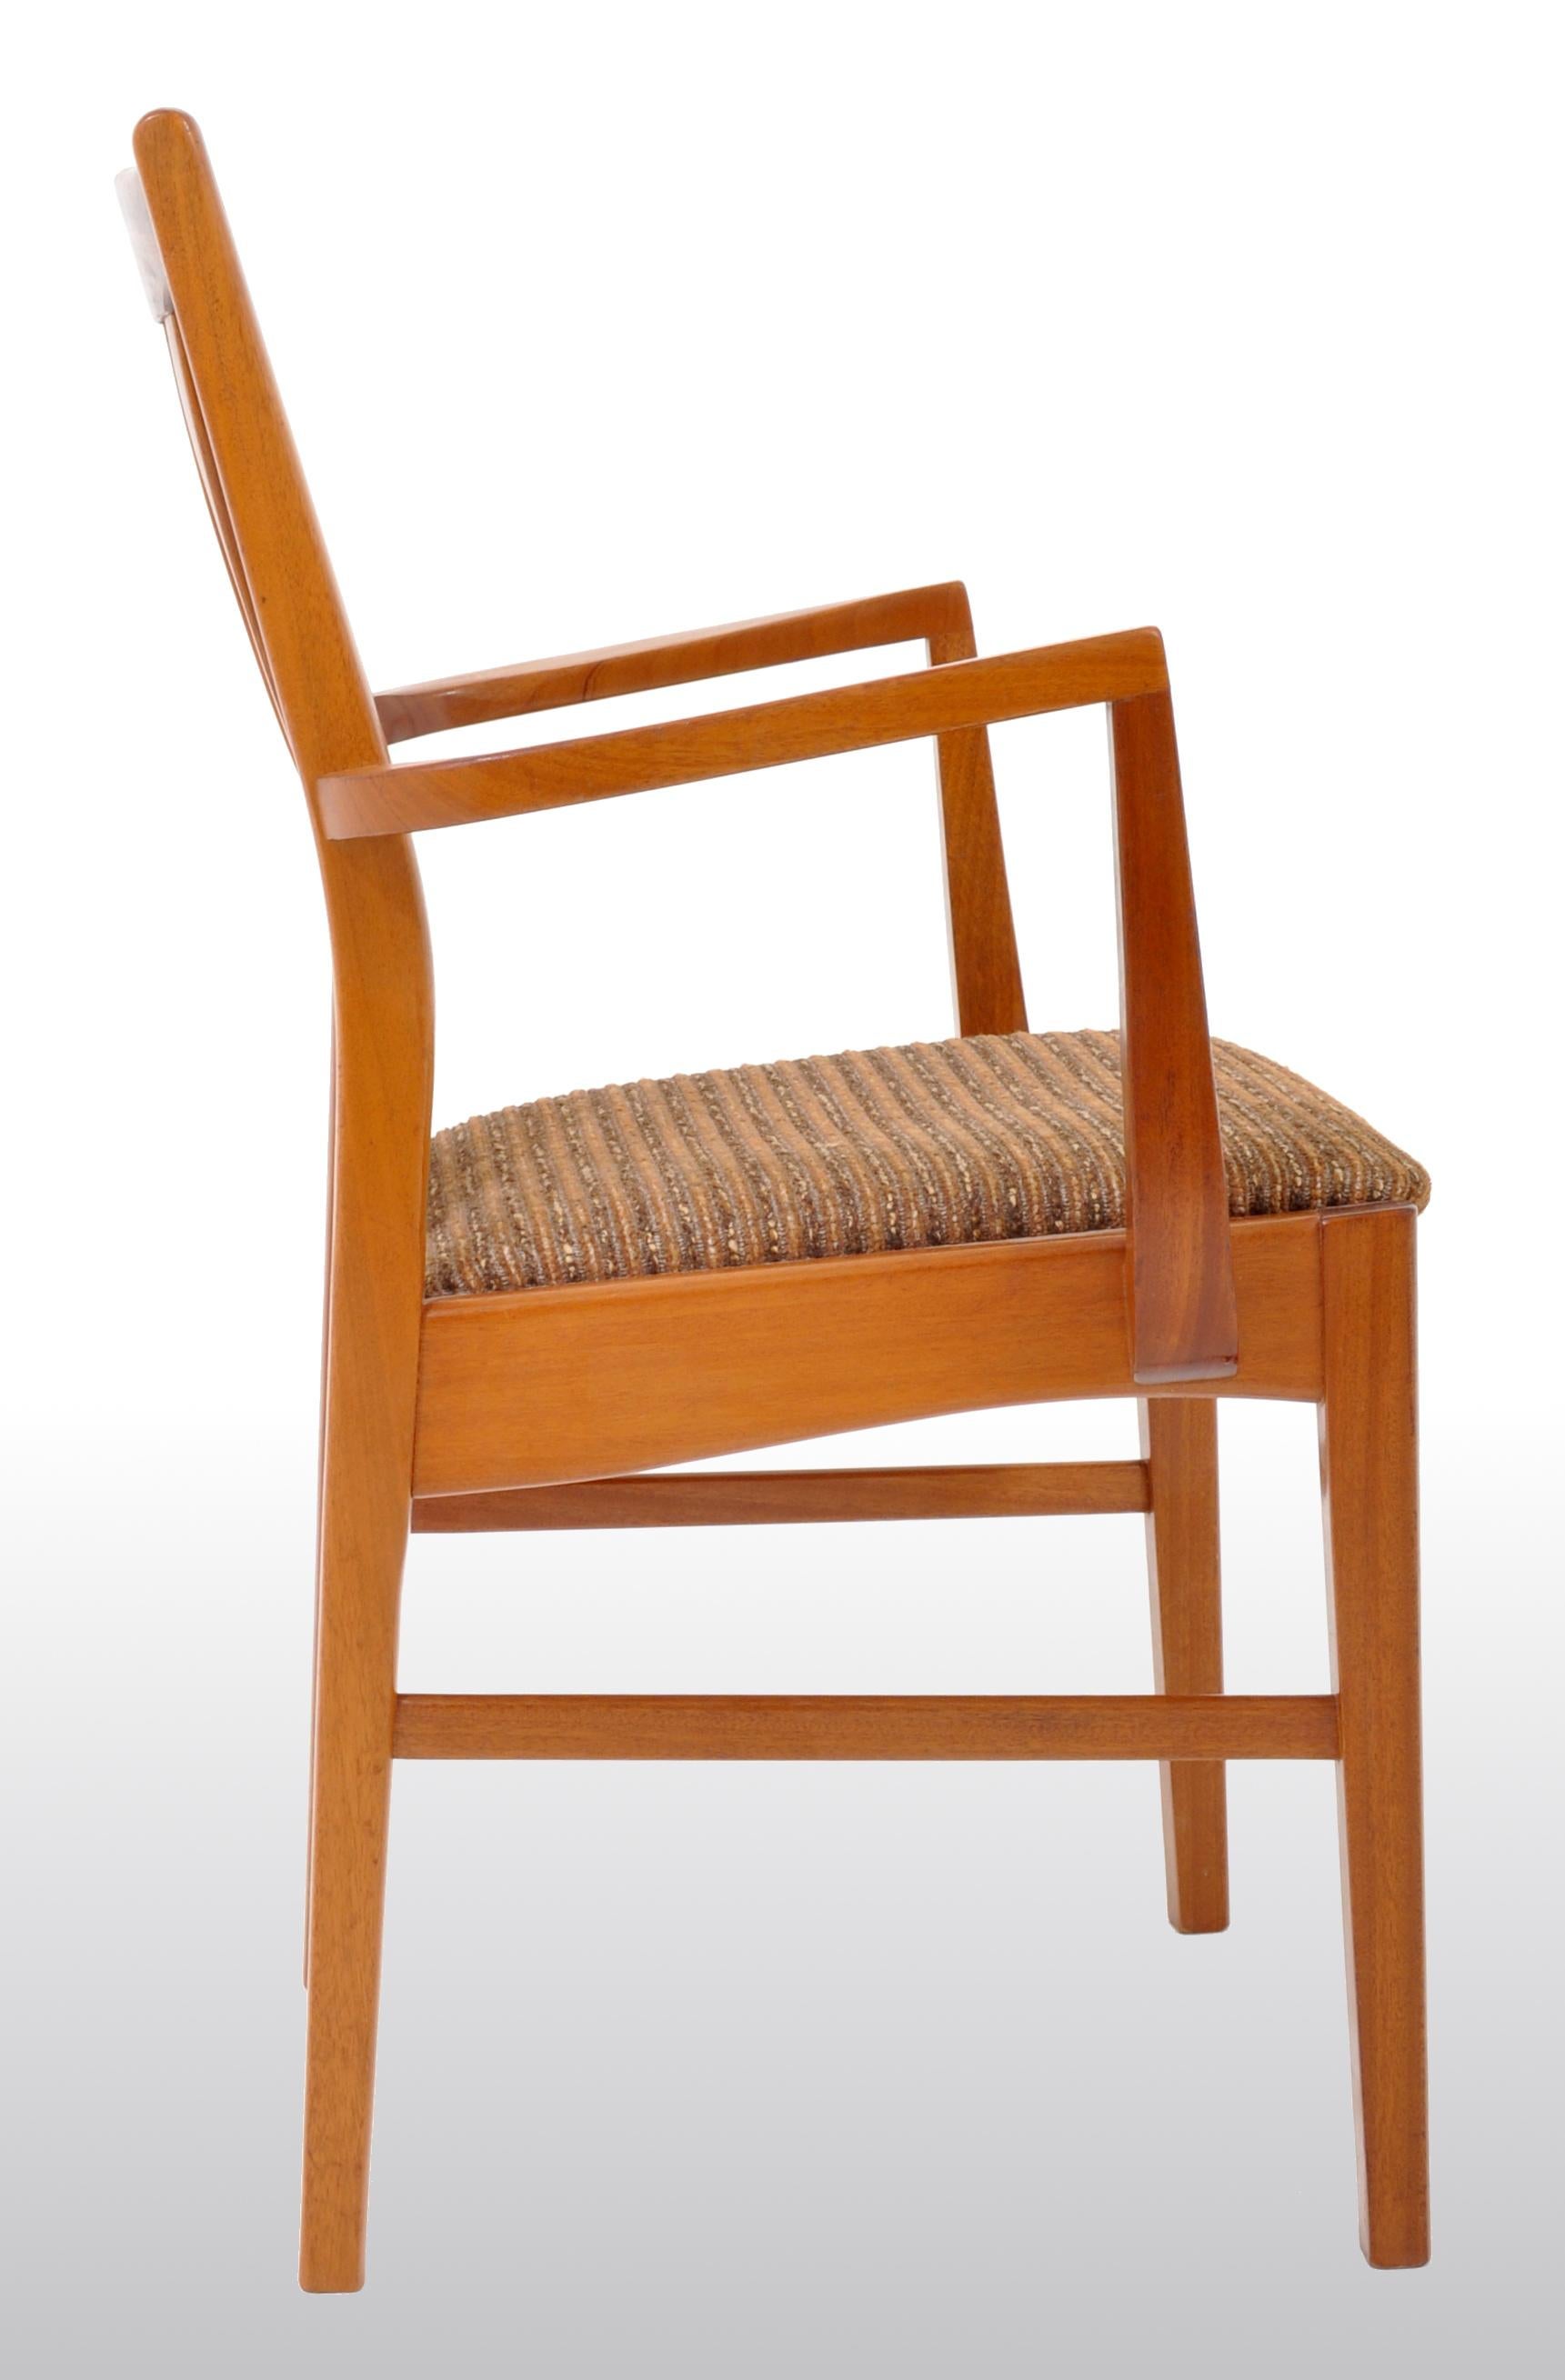 Pair of Mid-Century Modern Captain's/Armchairs in Teak, 1960s For Sale 1